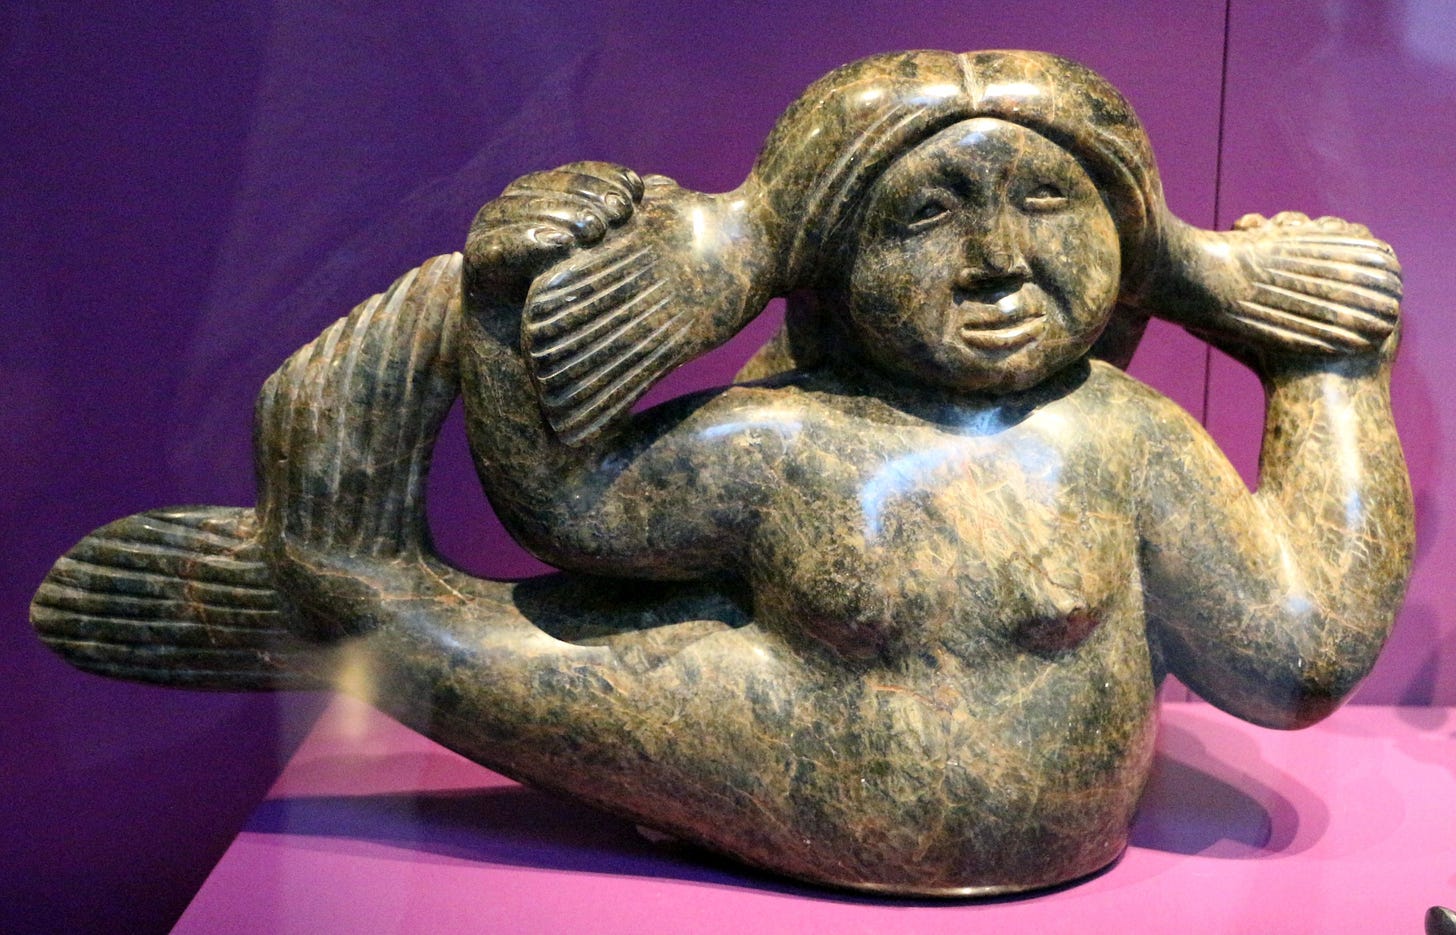 Sculpture of woman with fish tail, holding out her pigtails in both hands.